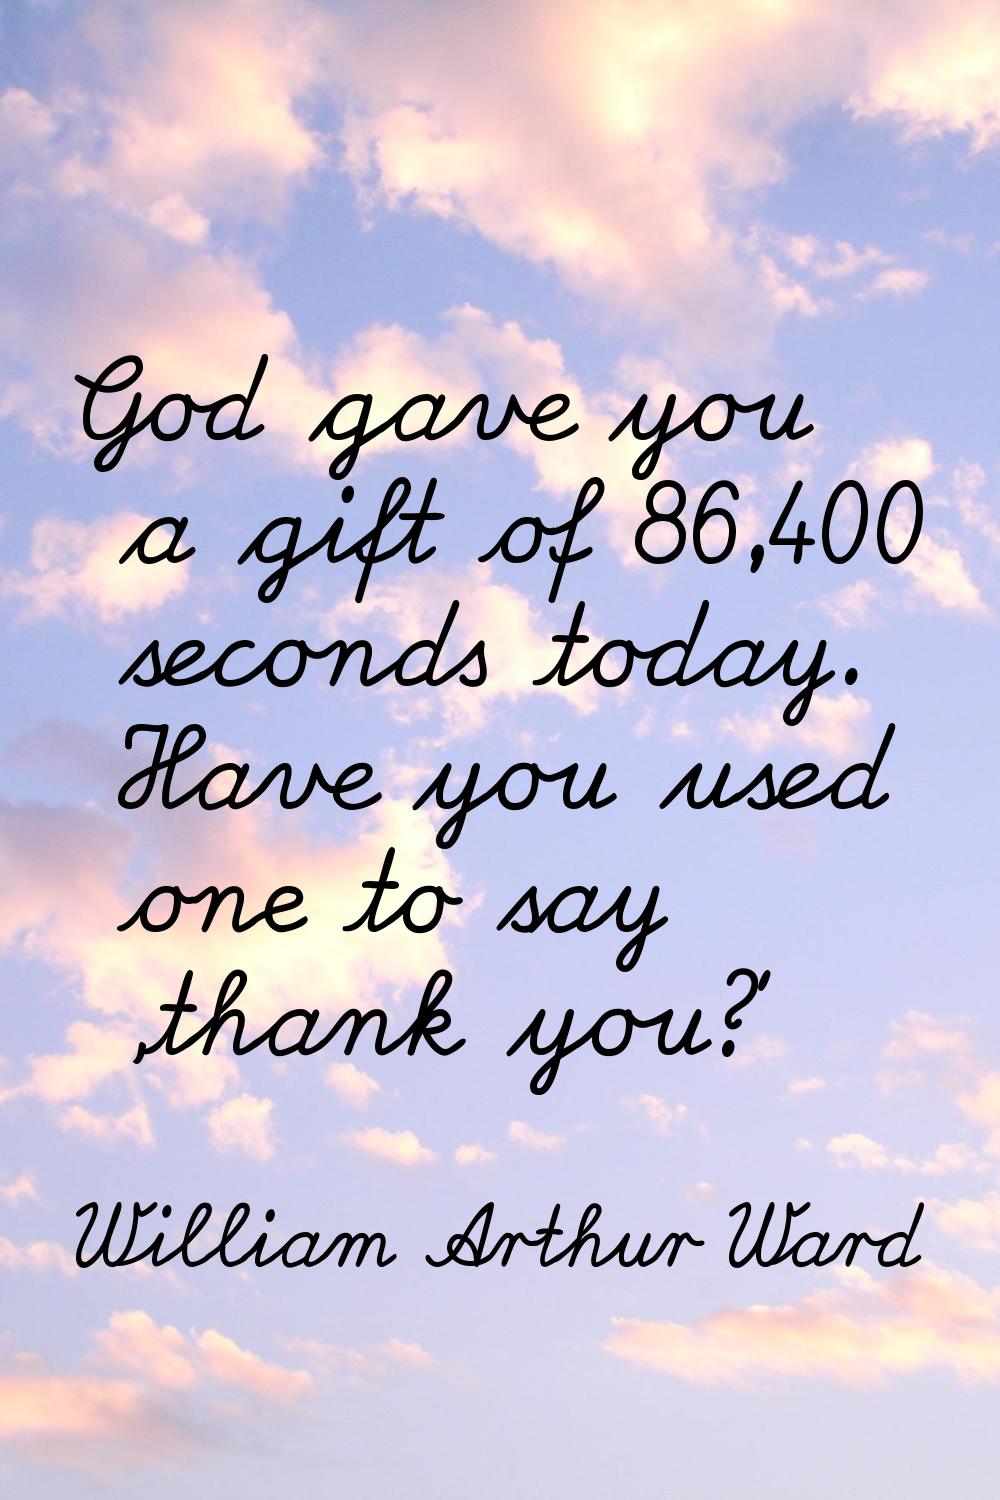 God gave you a gift of 86,400 seconds today. Have you used one to say 'thank you?'